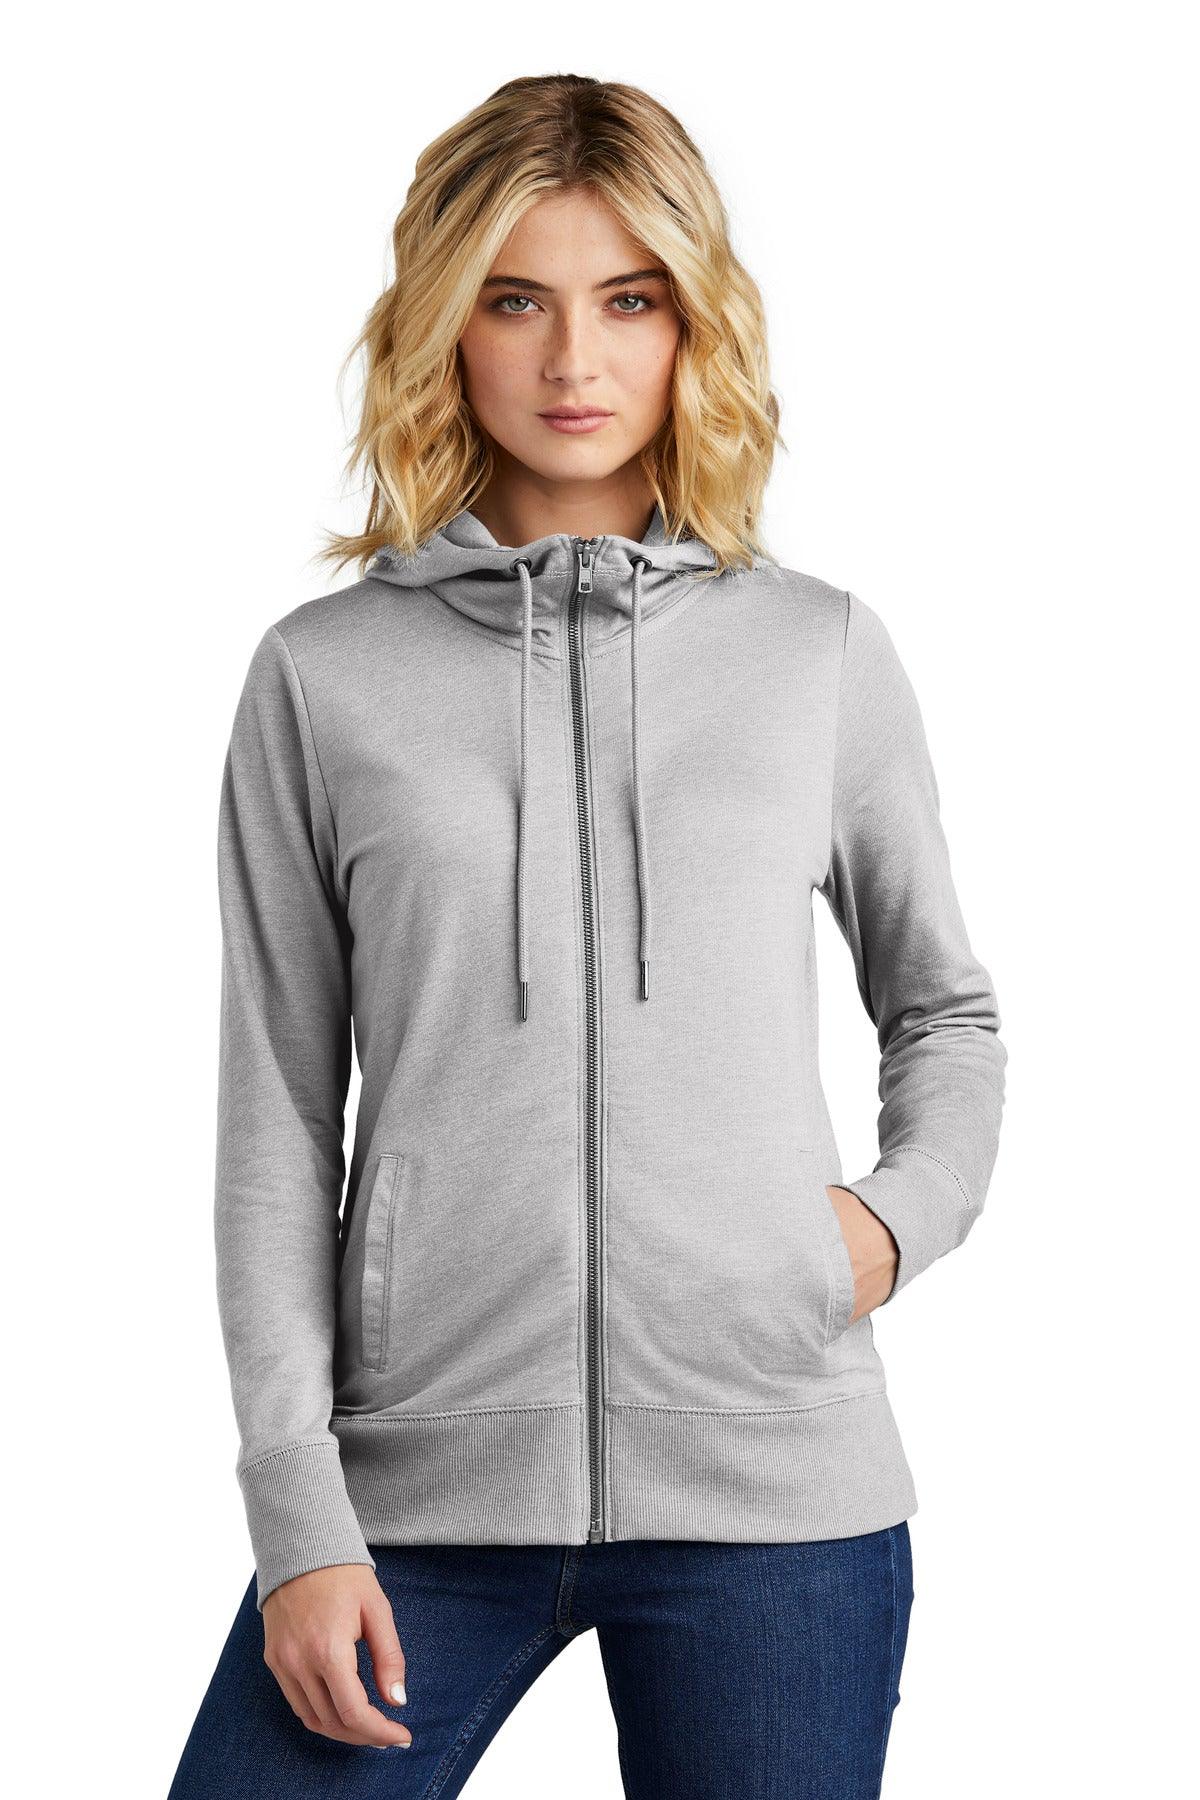 District Women's Featherweight French Terry Full-Zip Hoodie DT673 - Dresses Max